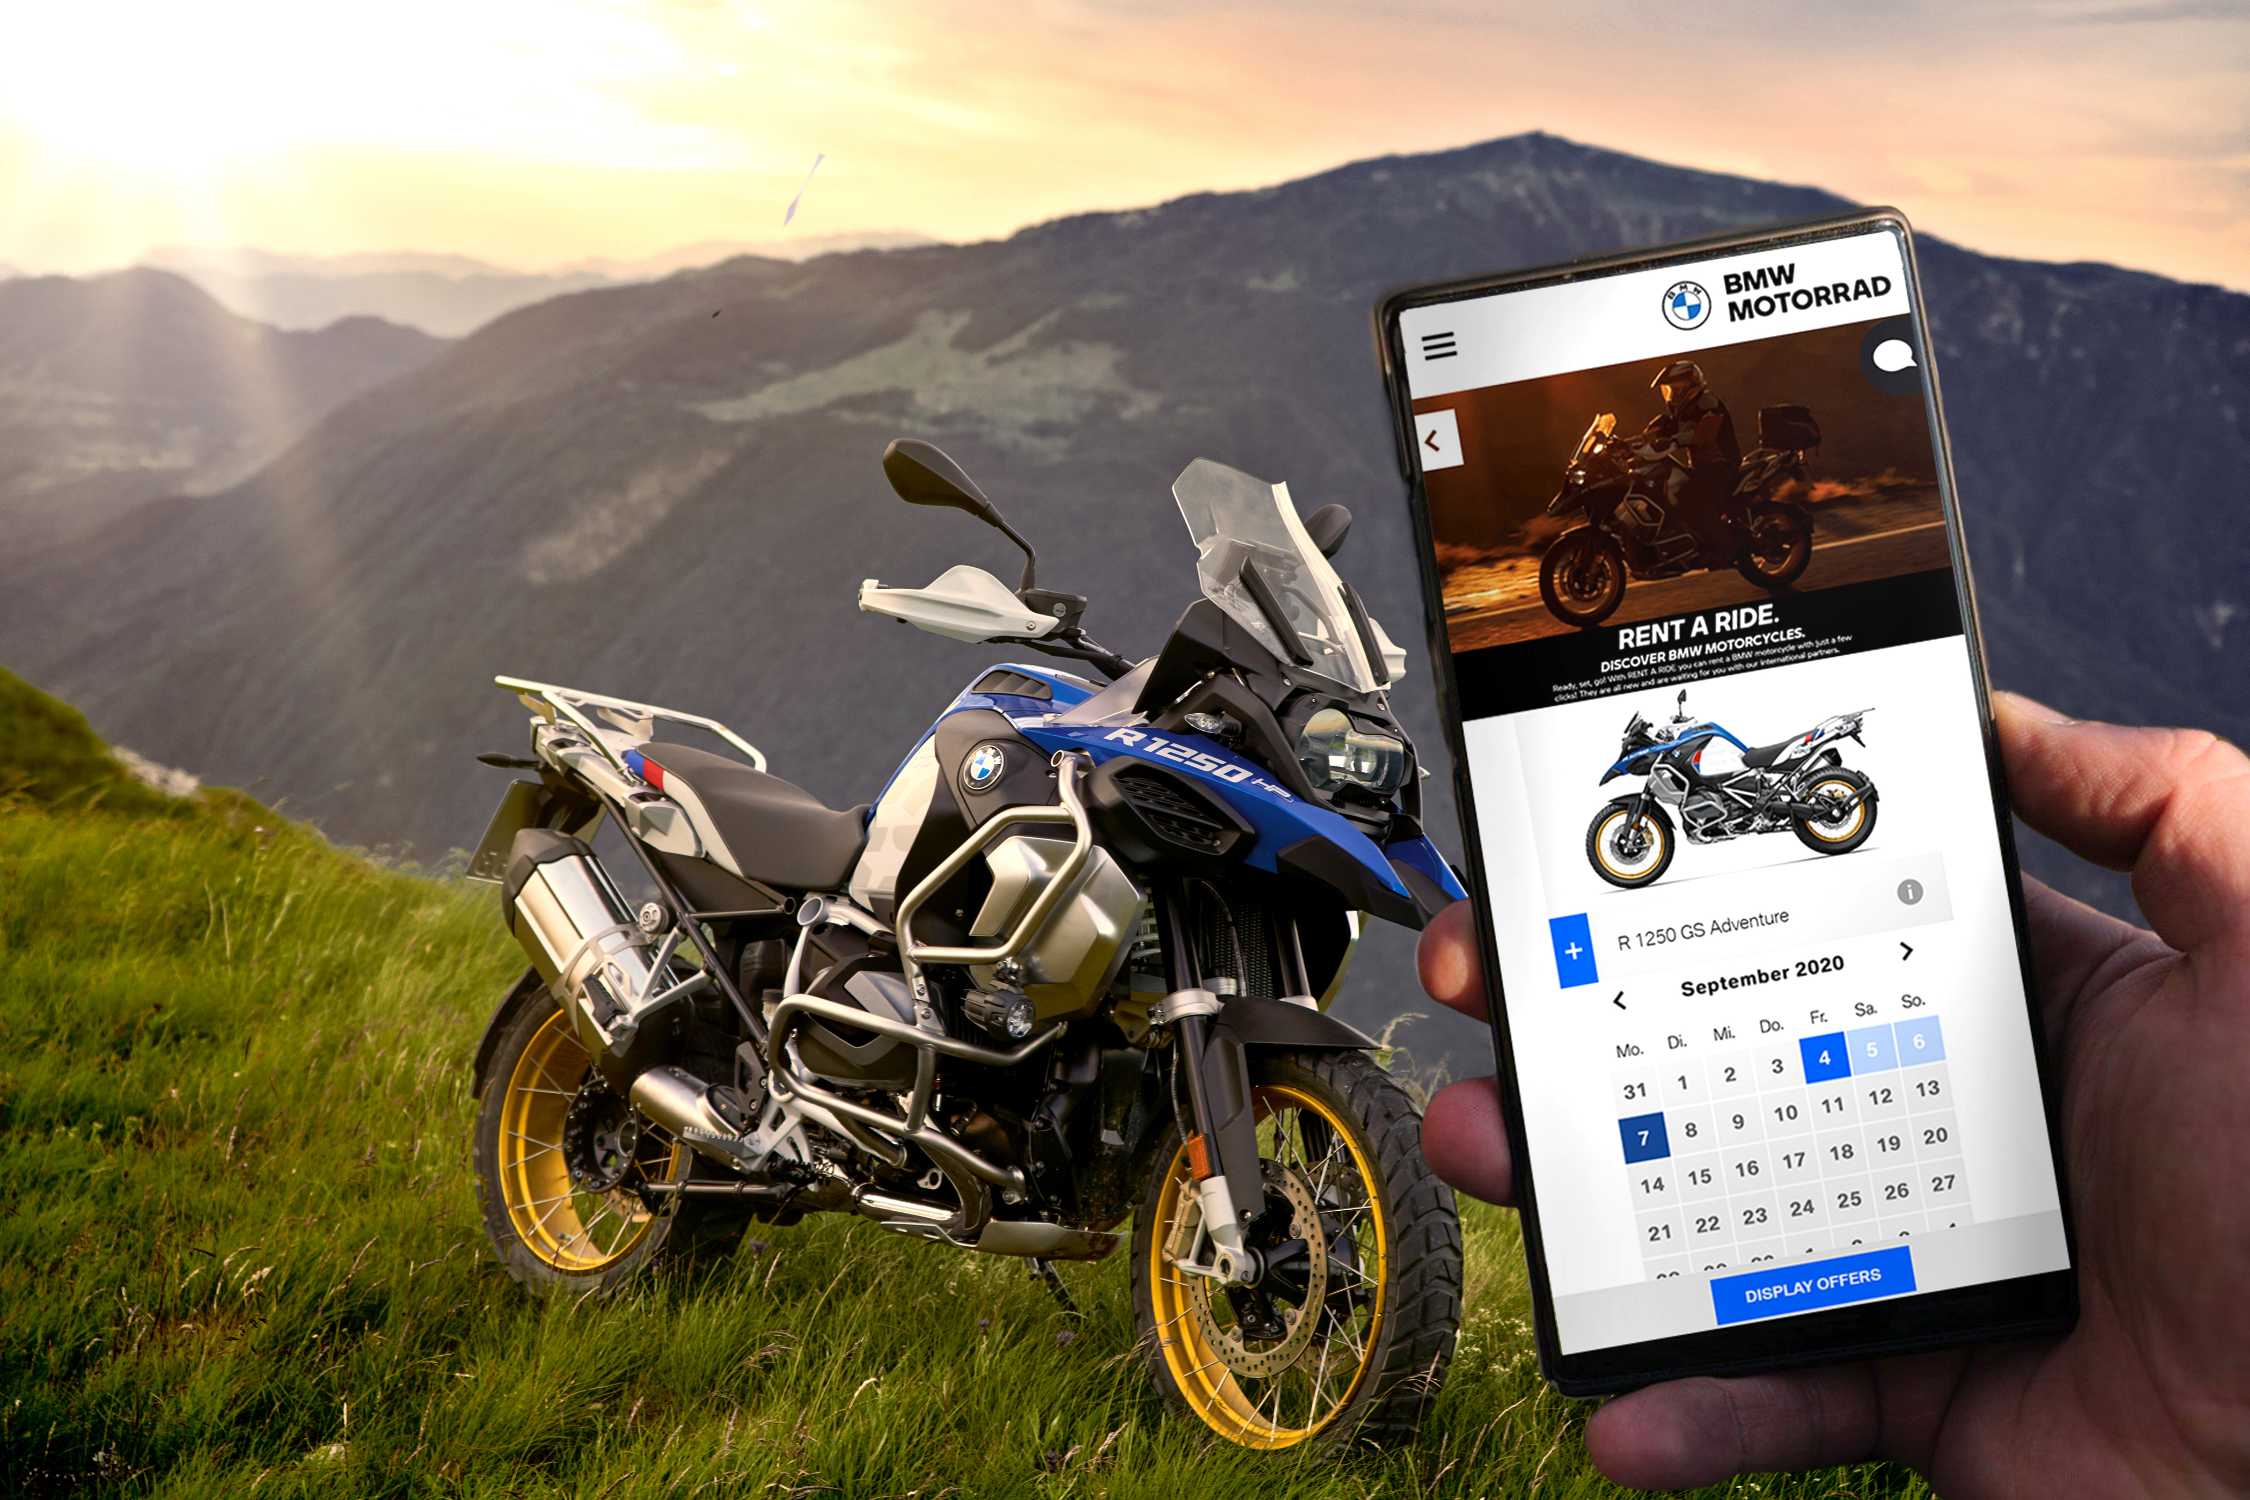 BMW Motorrad continues to expand RENT A RIDE.